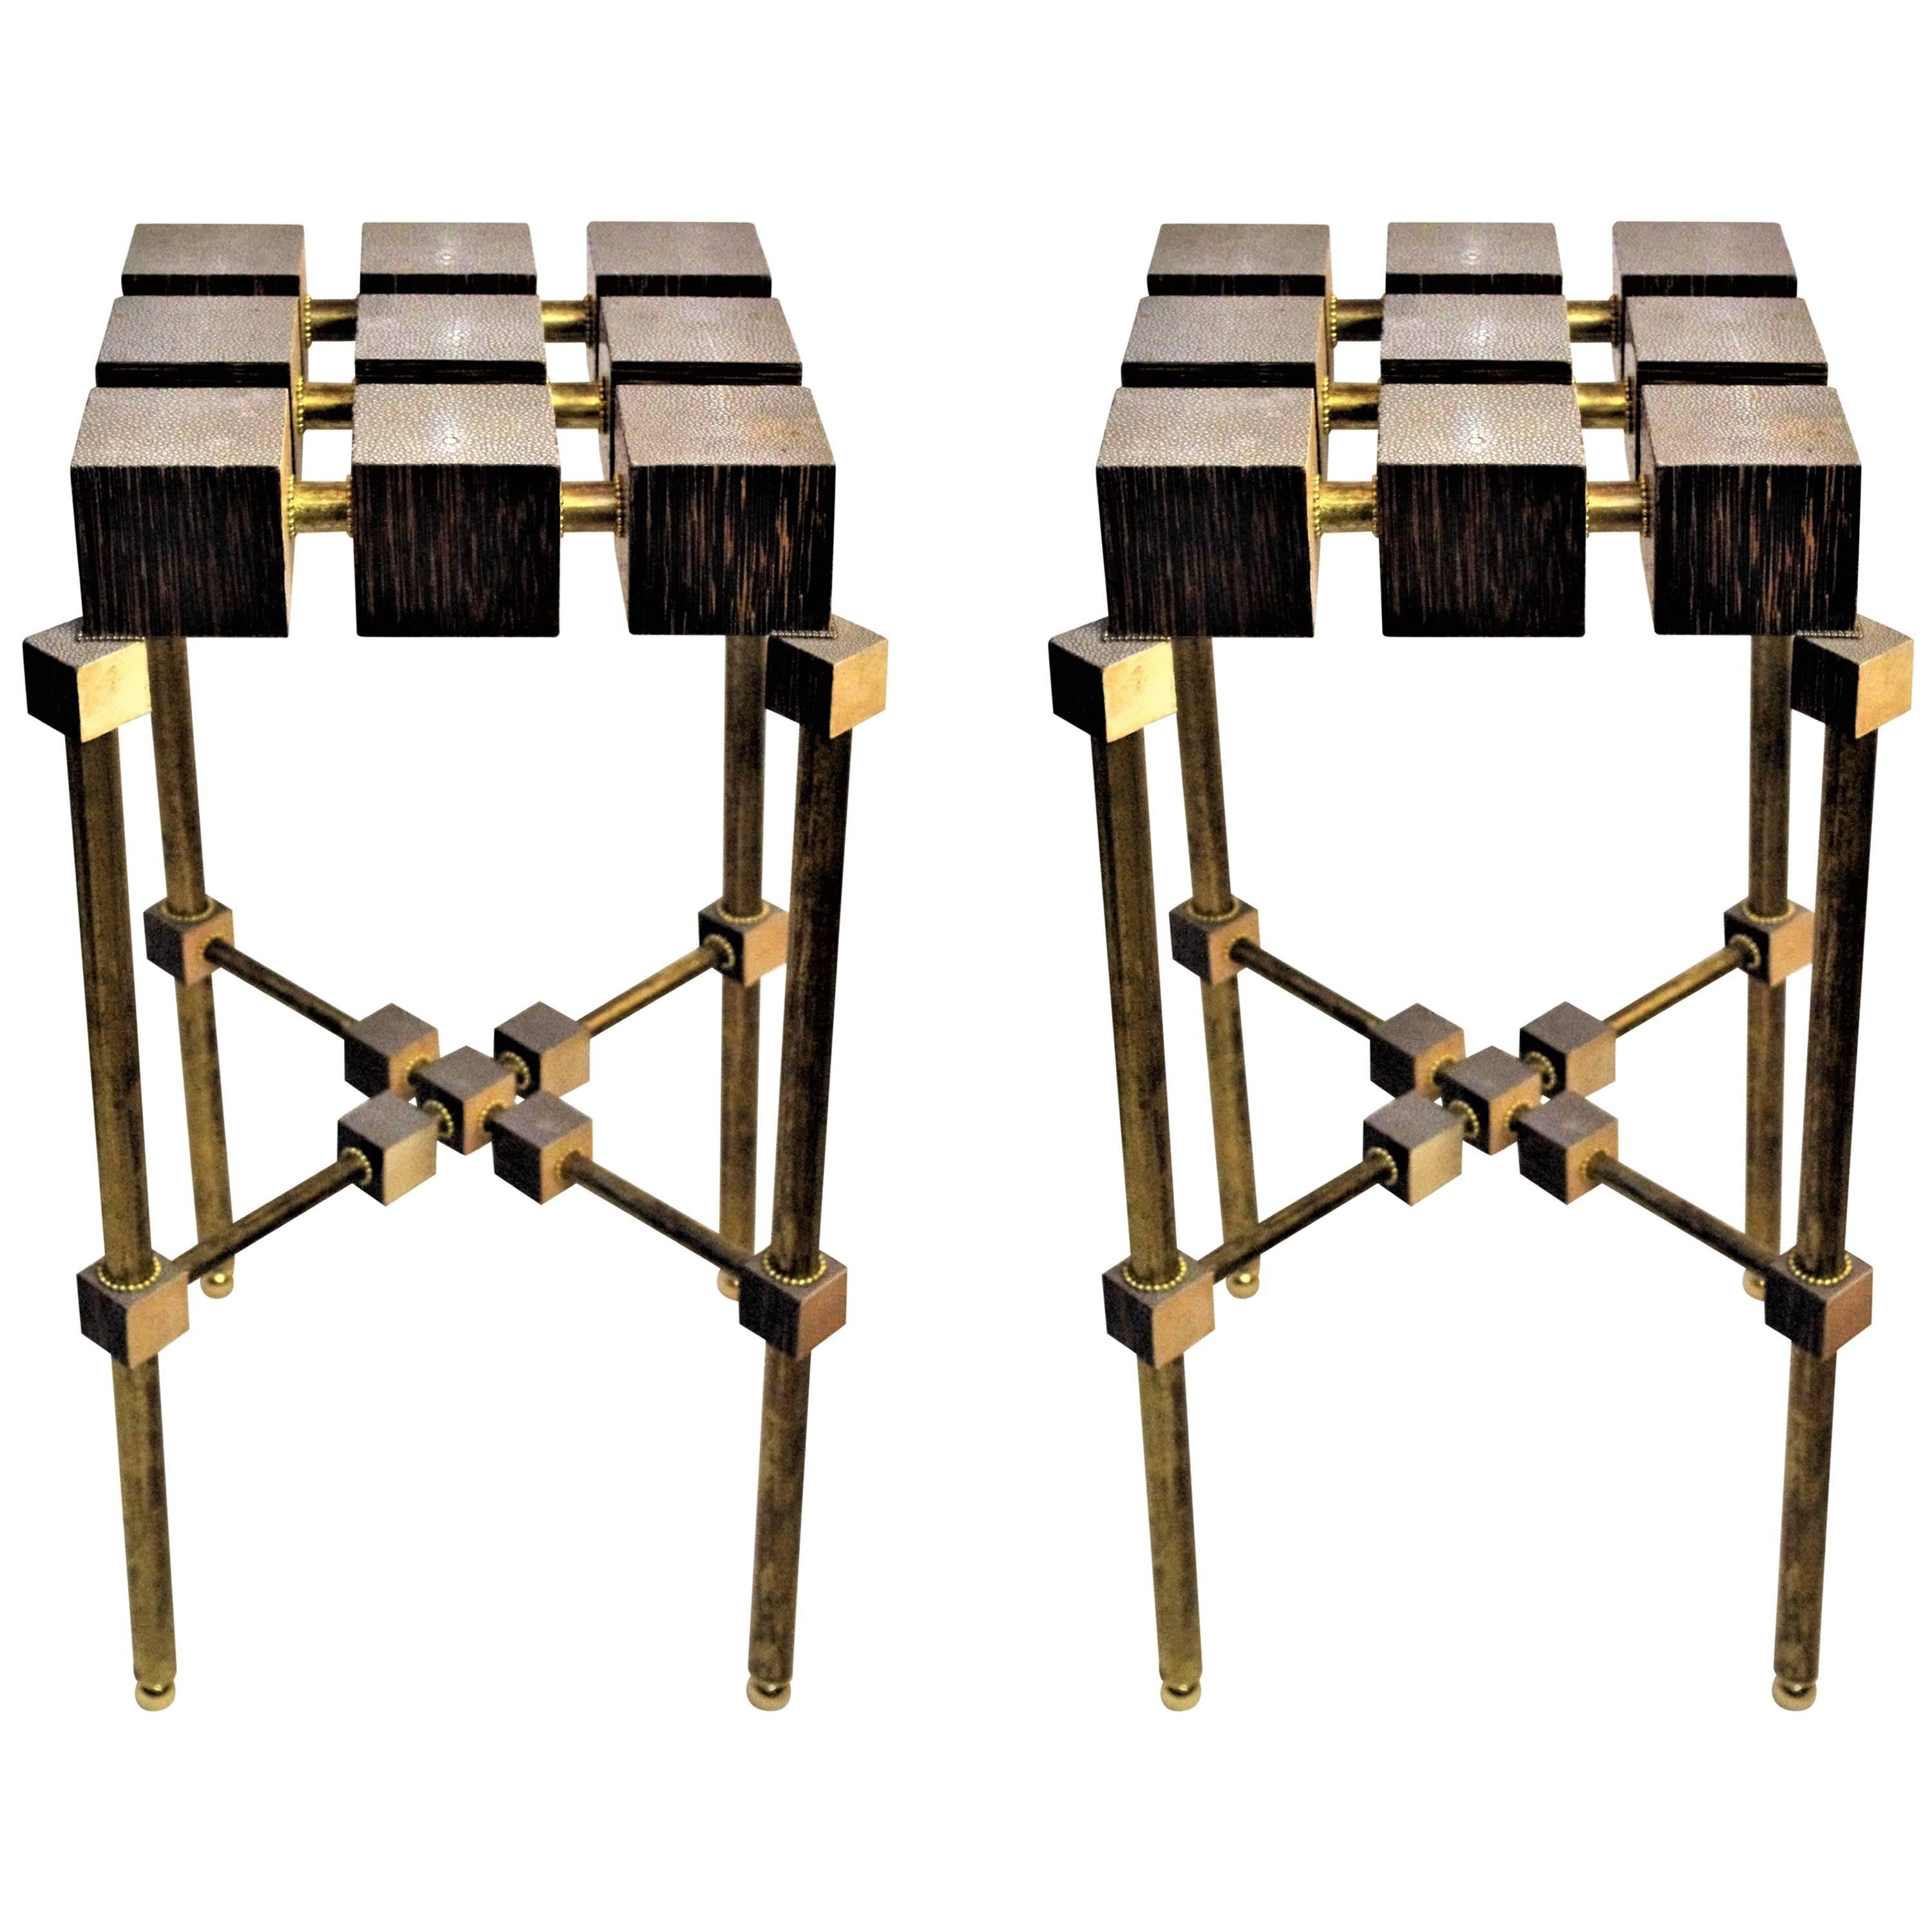 Pair of Luxury Handmade Galuchat High Side Tables